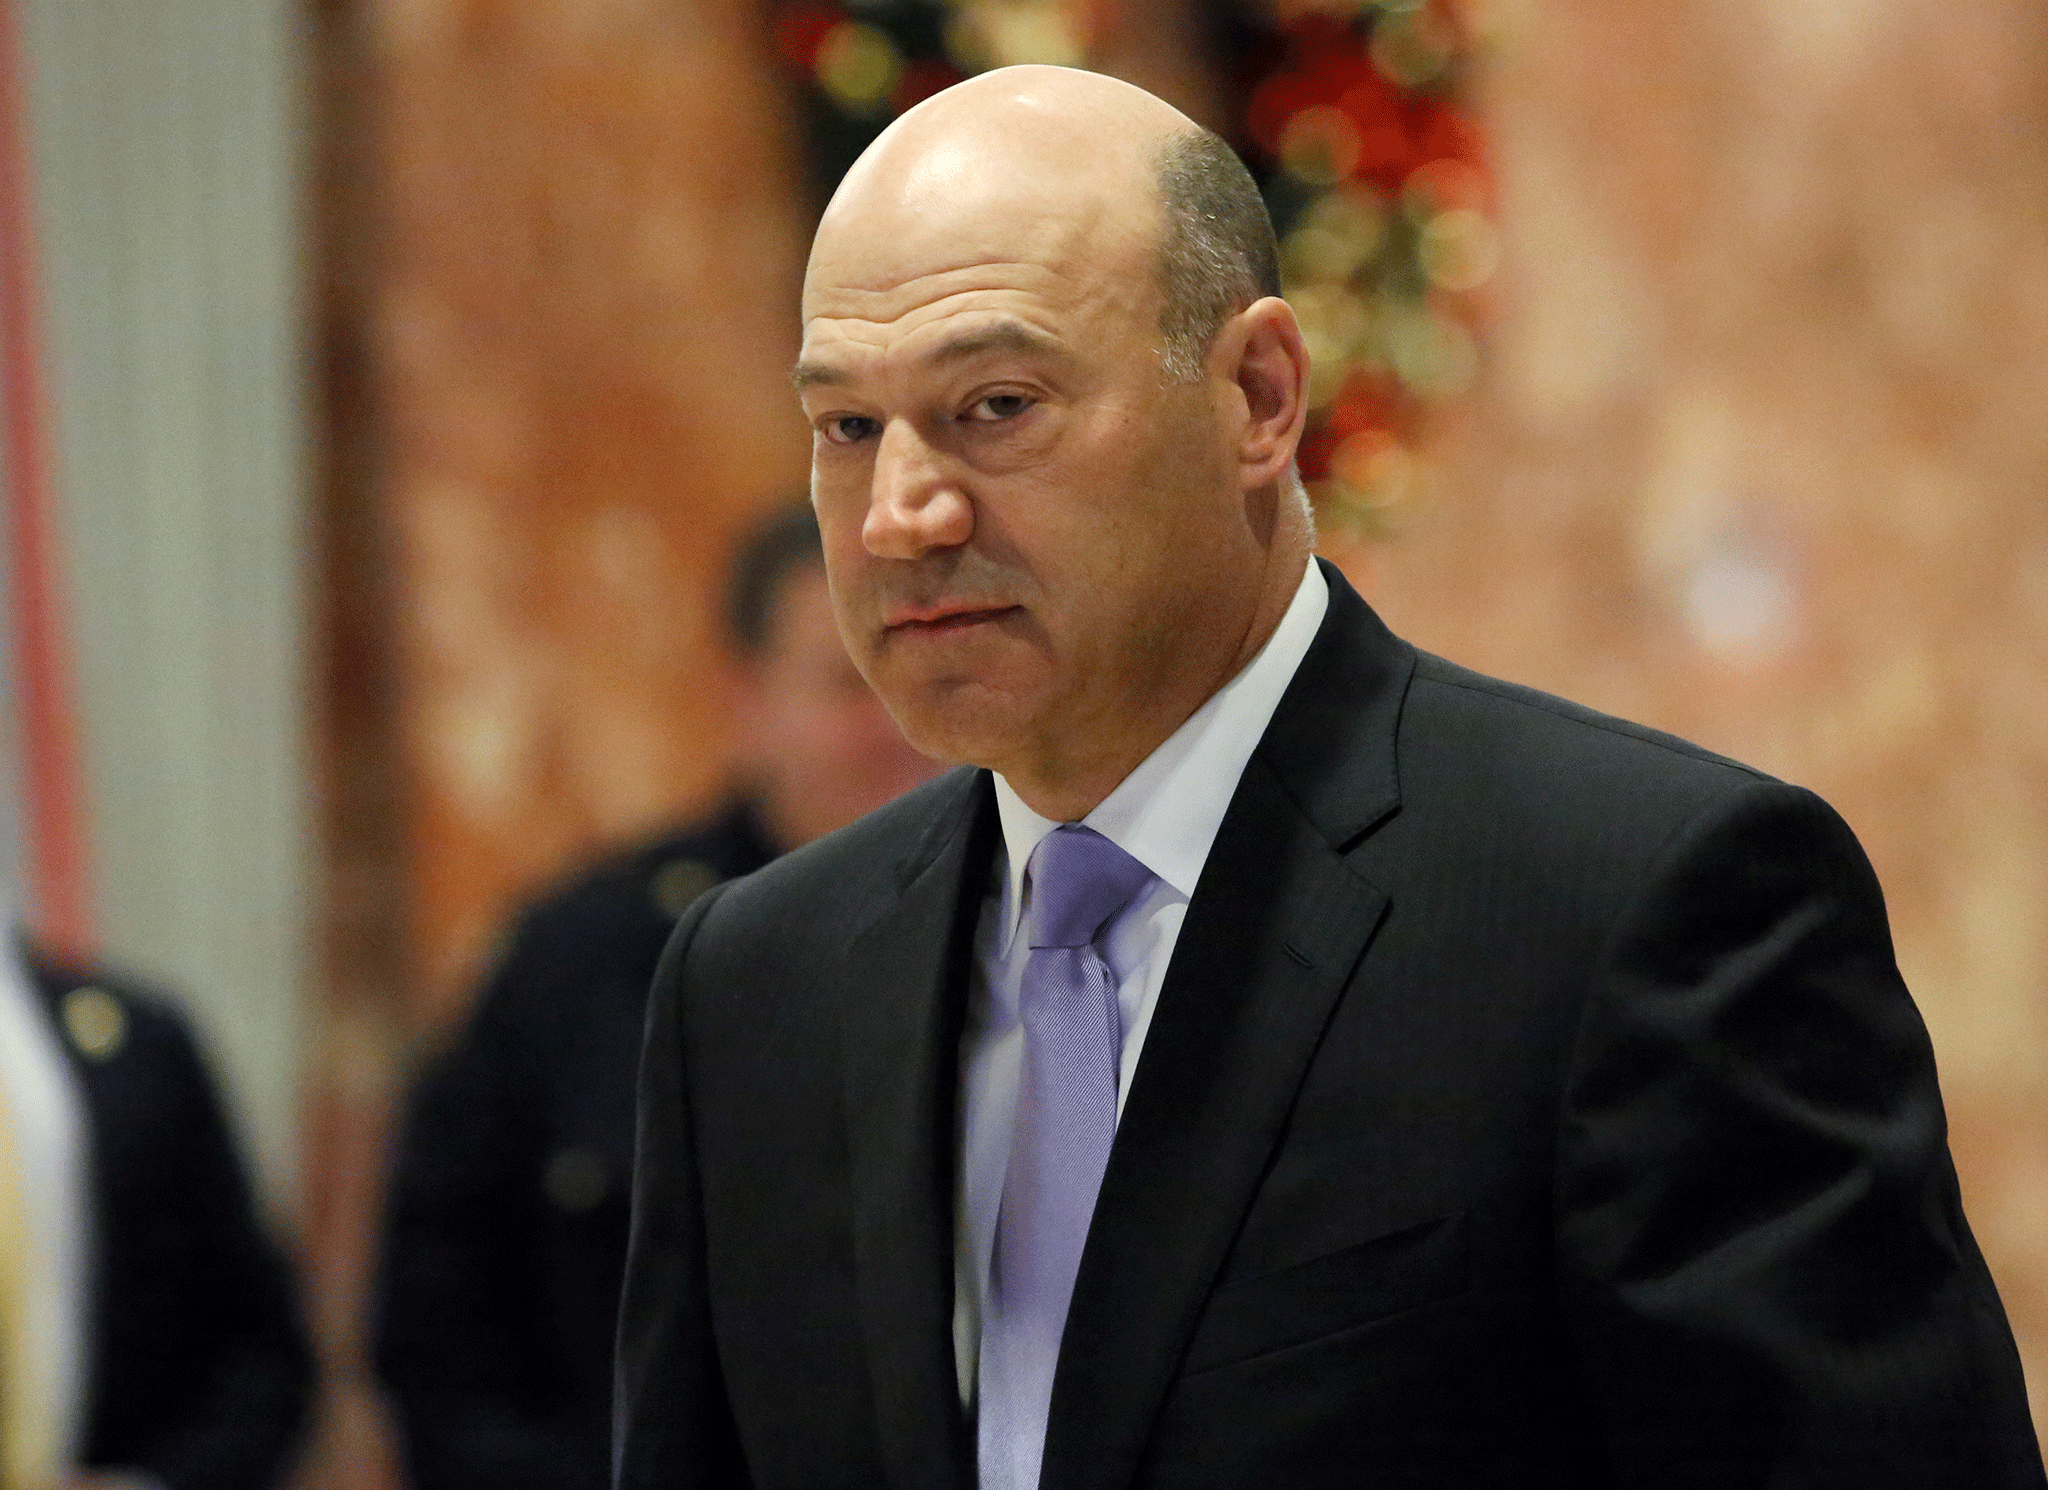 Former Goldman Sachs president Gary Cohn will head up the President's economic council and id one of several former Goldman employees in Mr Trump's team